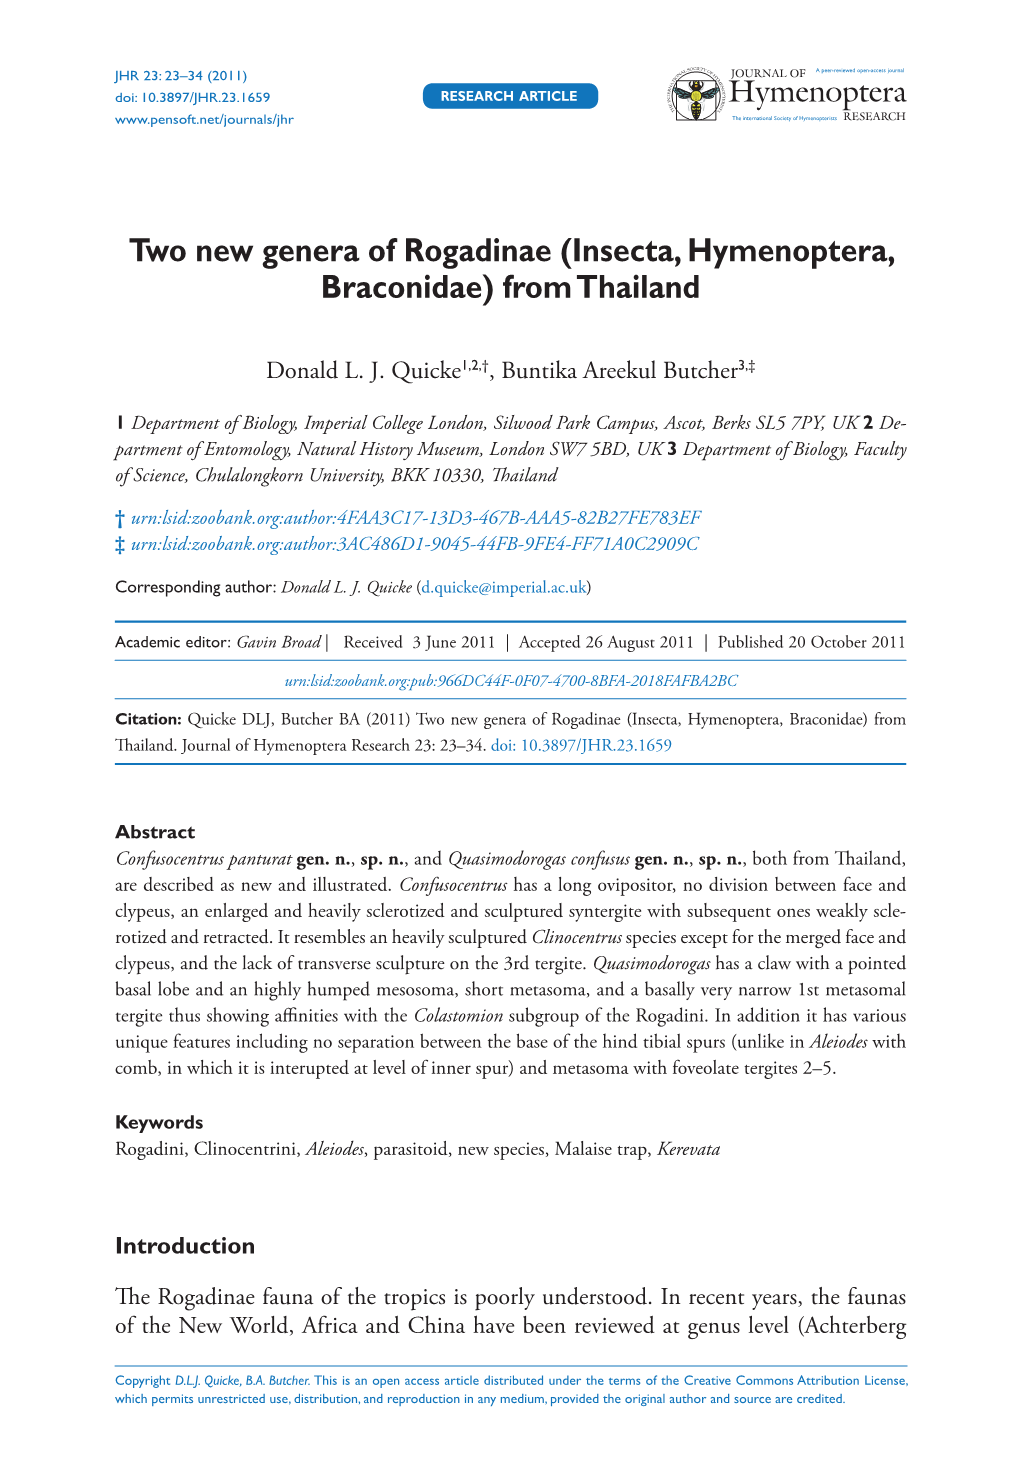 Two New Genera of Rogadinae (Insecta, Hymenoptera, Braconidae) from Thailand